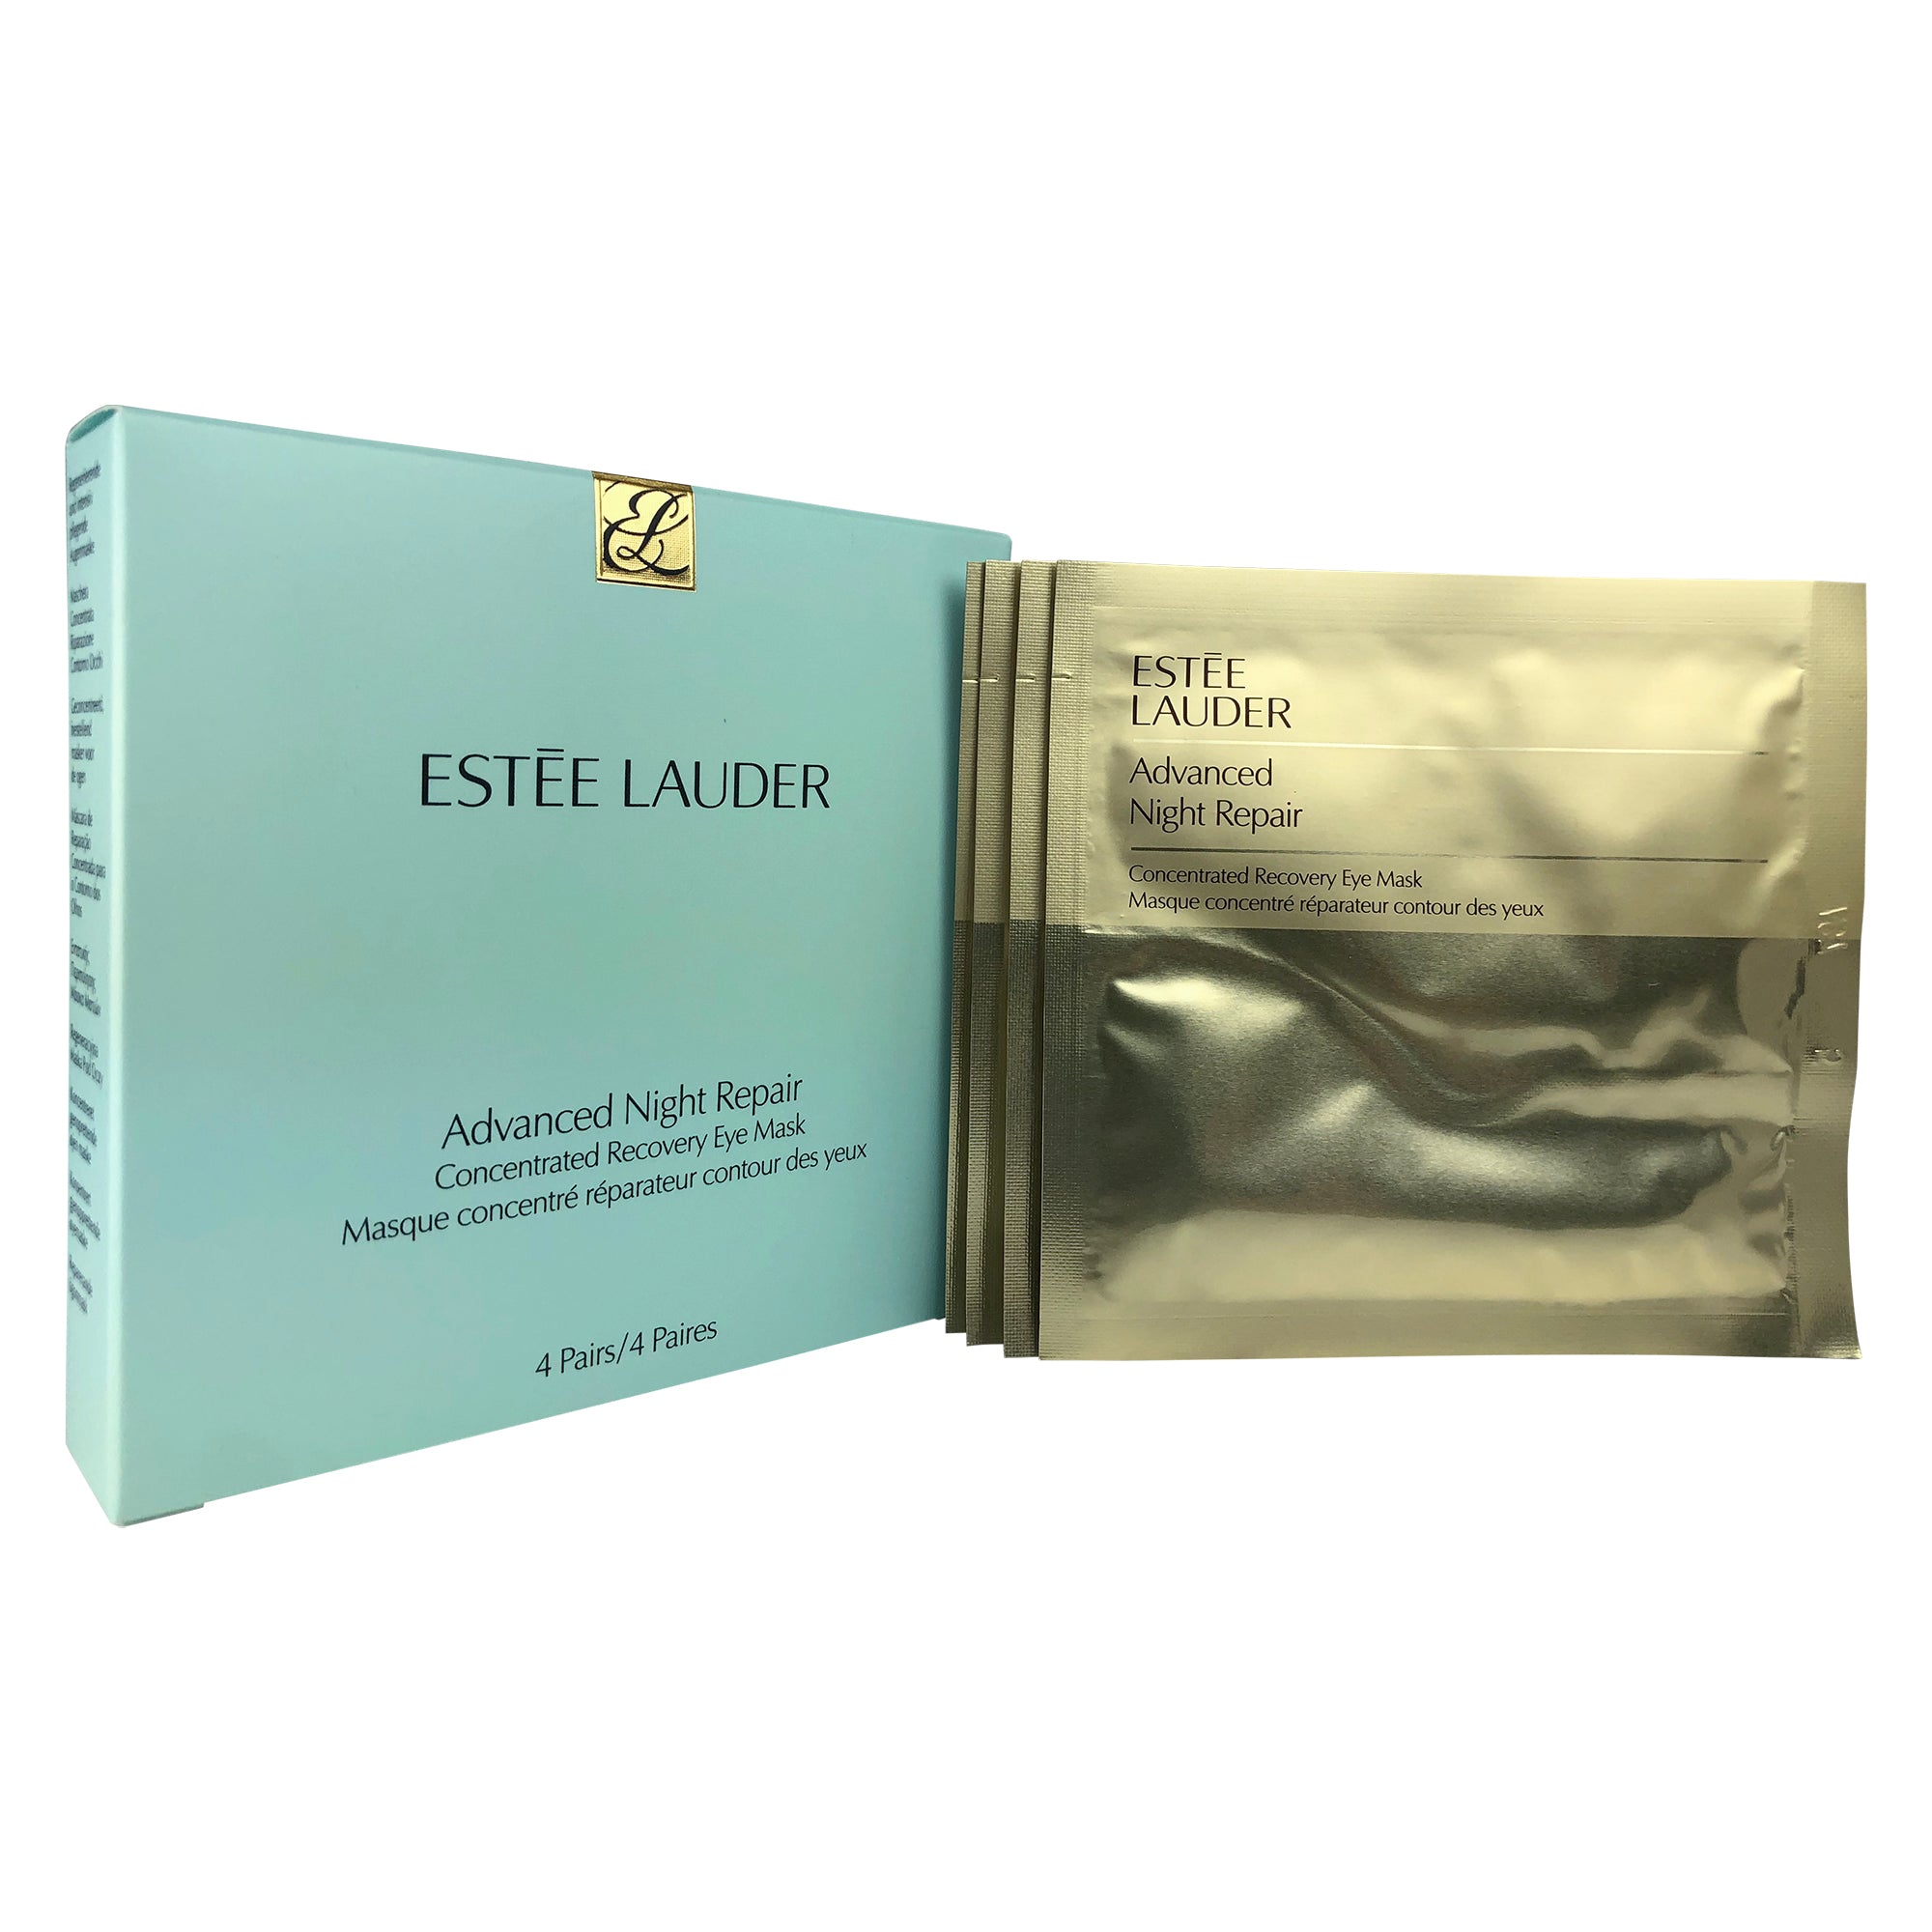 Estee Lauder Advanced Night Repair Concentrated Recovery Eye Mask - 4 Pairs